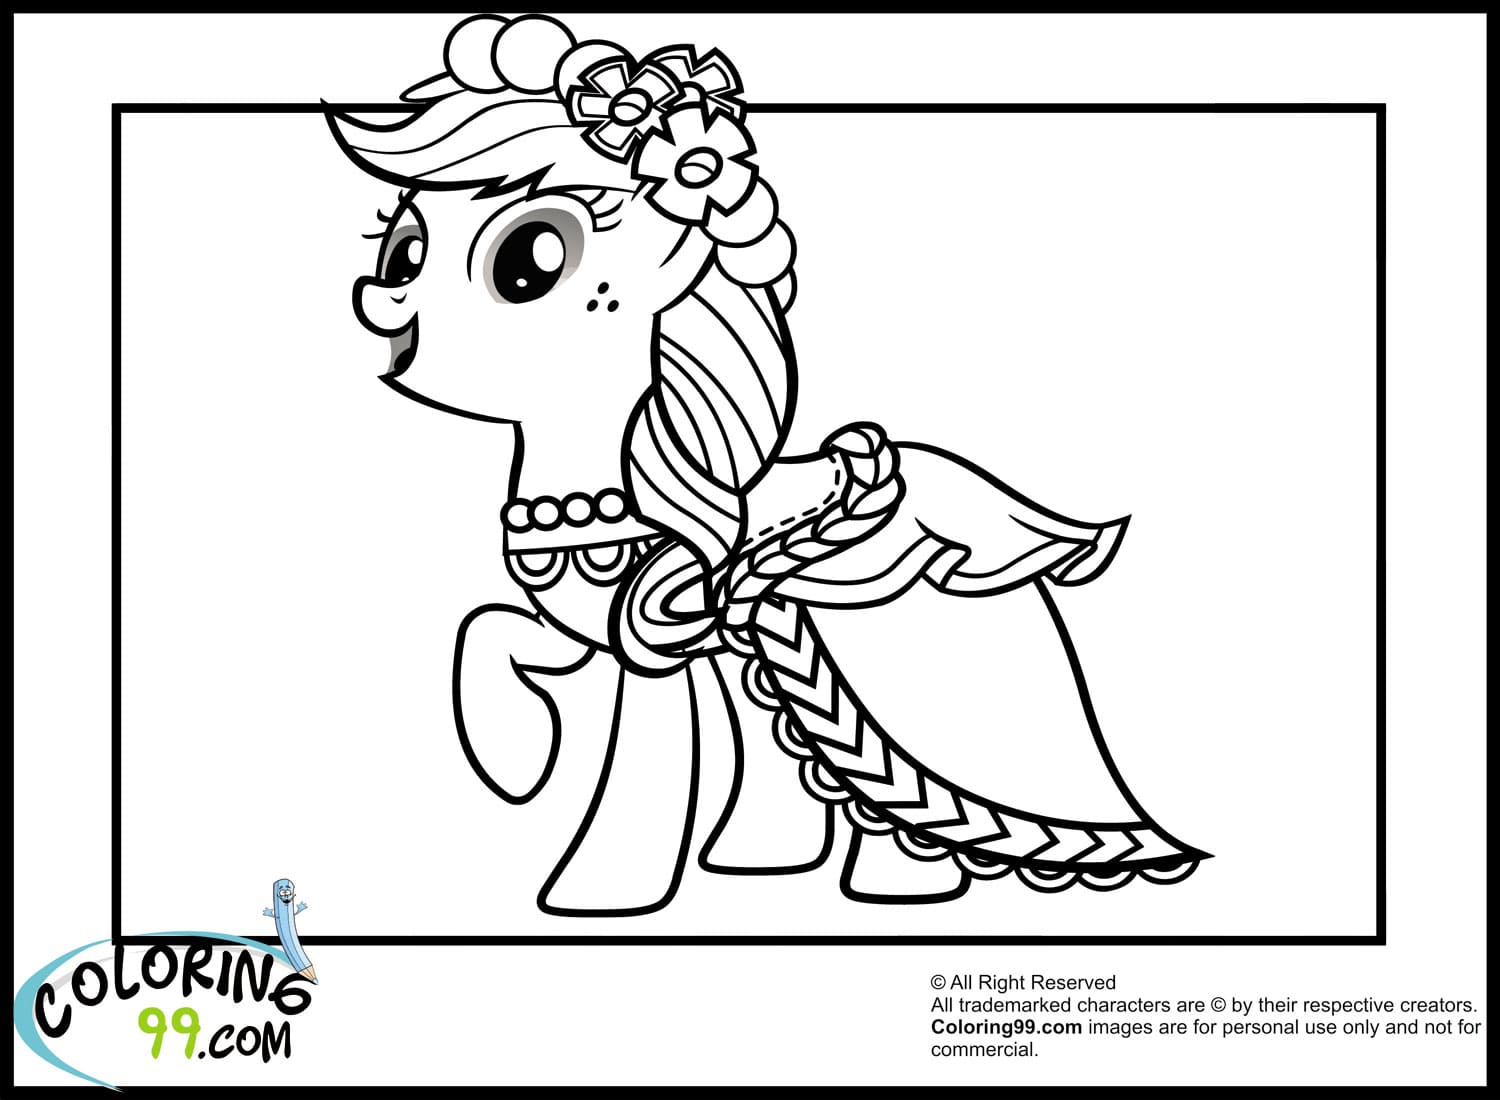 Dress My Little Pony Image Coloring Page